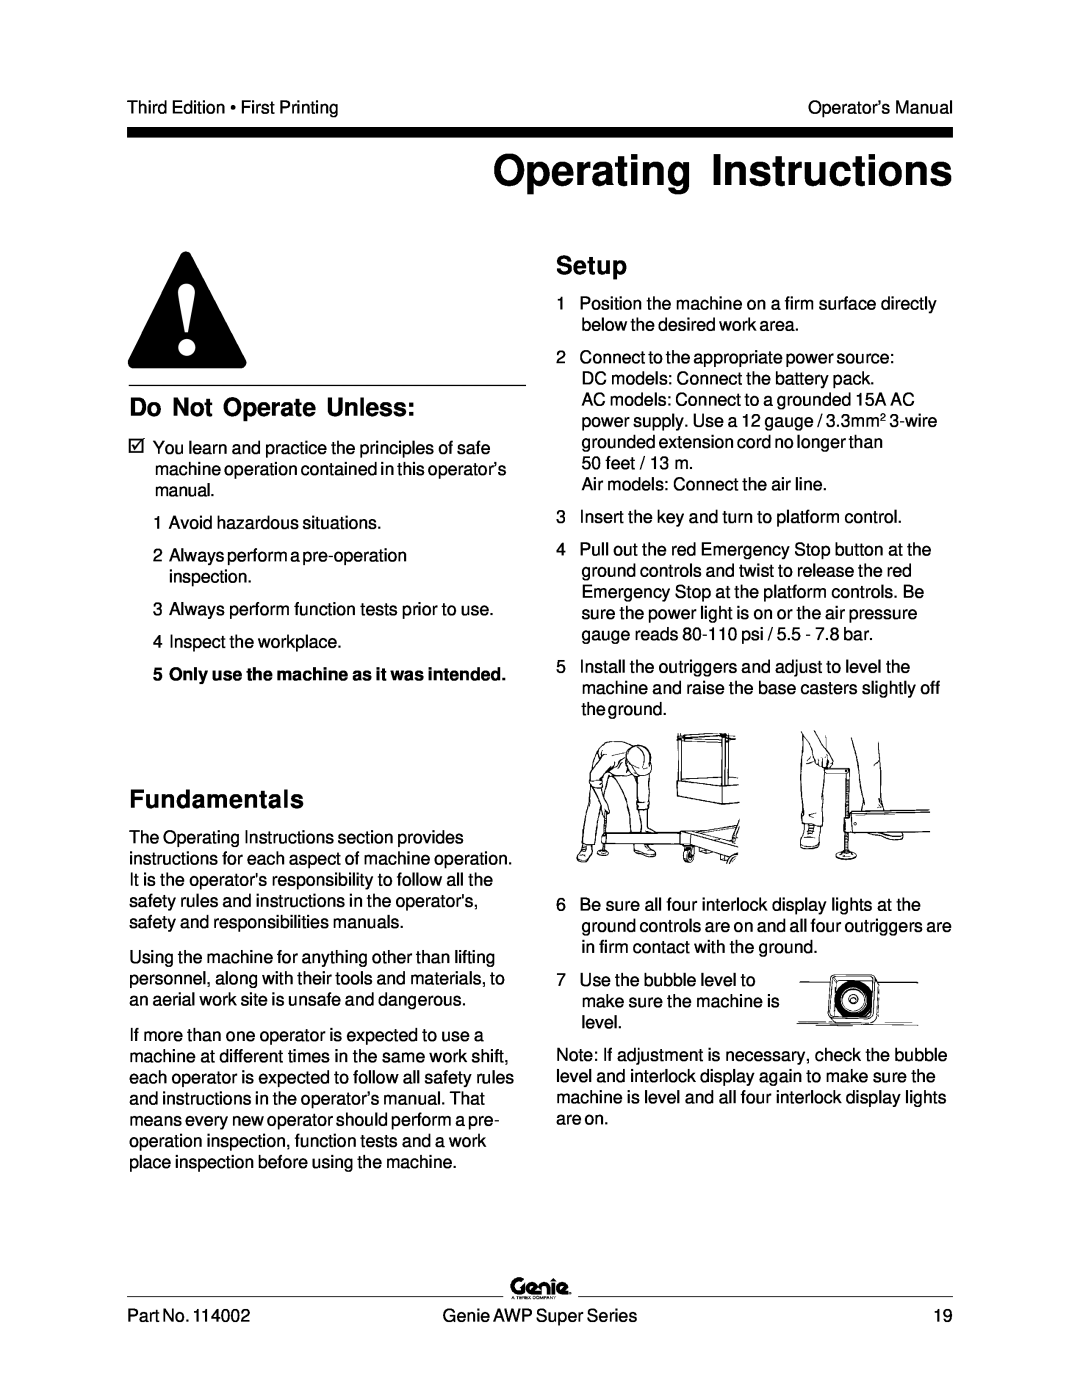 Genie 114002 Operating Instructions, Setup, Only use the machine as it was intended, Do Not Operate Unless, Fundamentals 